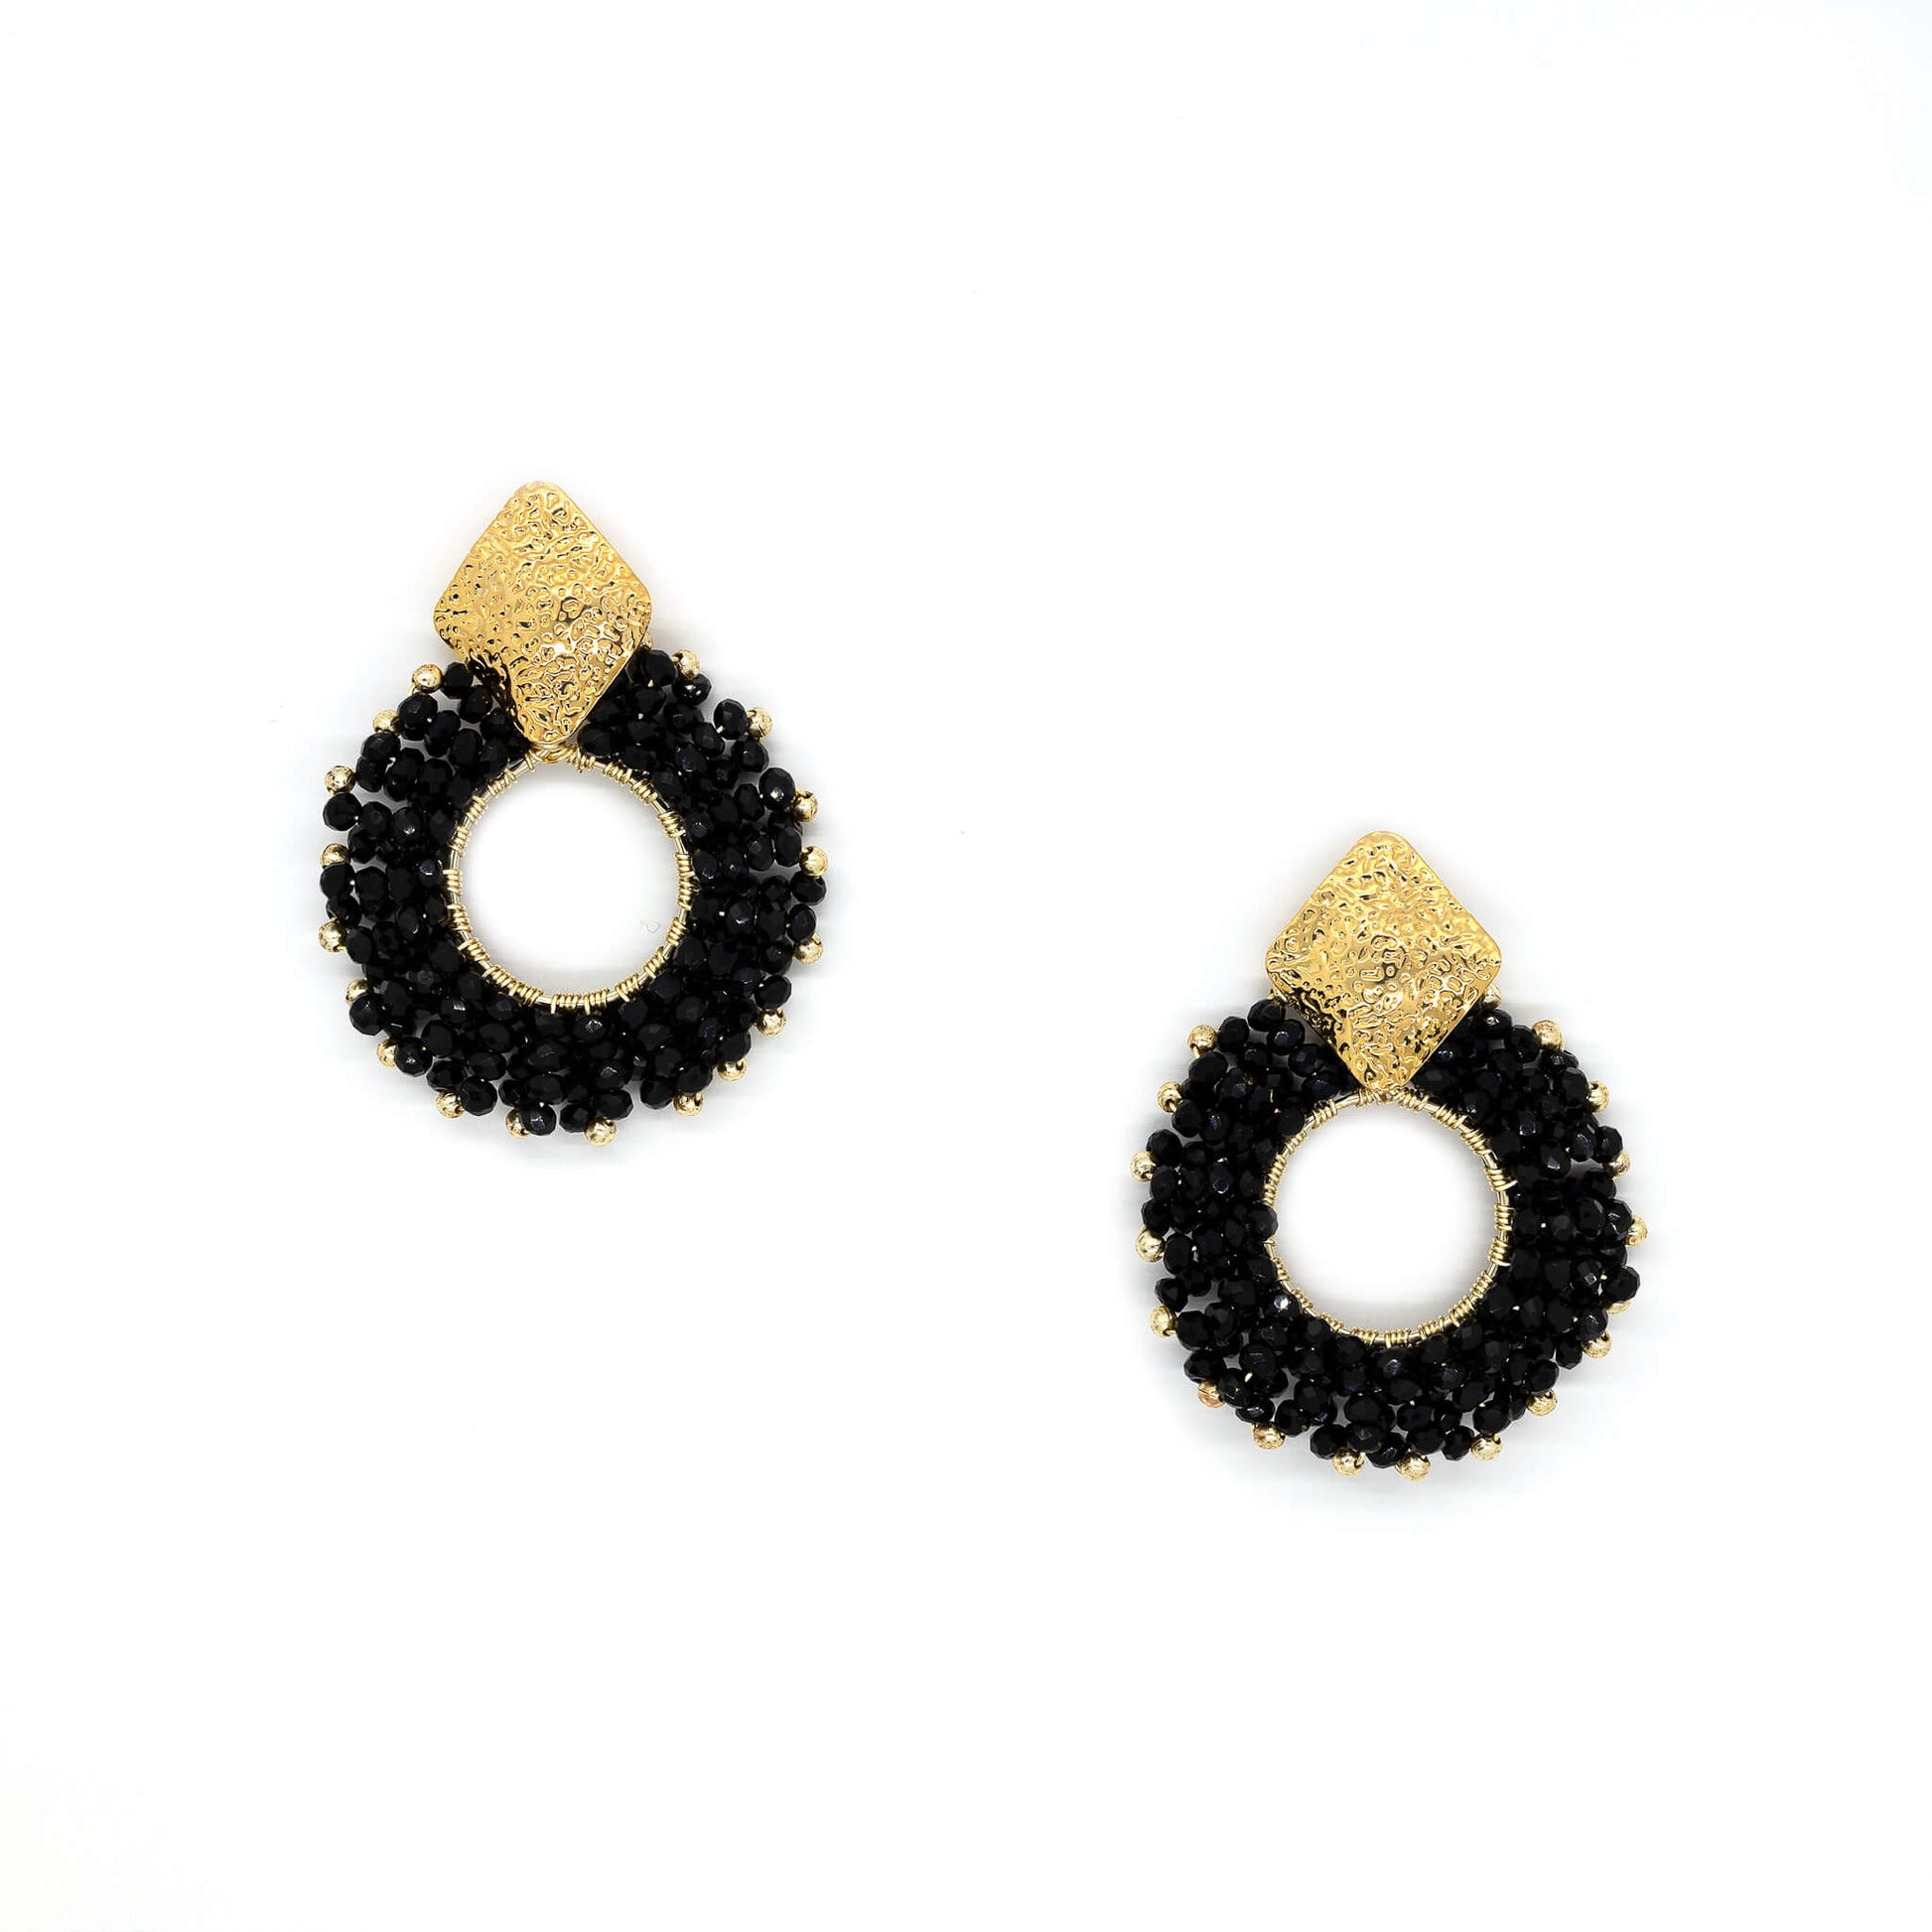 The Evry stud Earrings are 2 inches long. Gold and Black Earrings. Lightweight and comfortable simple earrings. Handmade for women. Gold beaded earrings